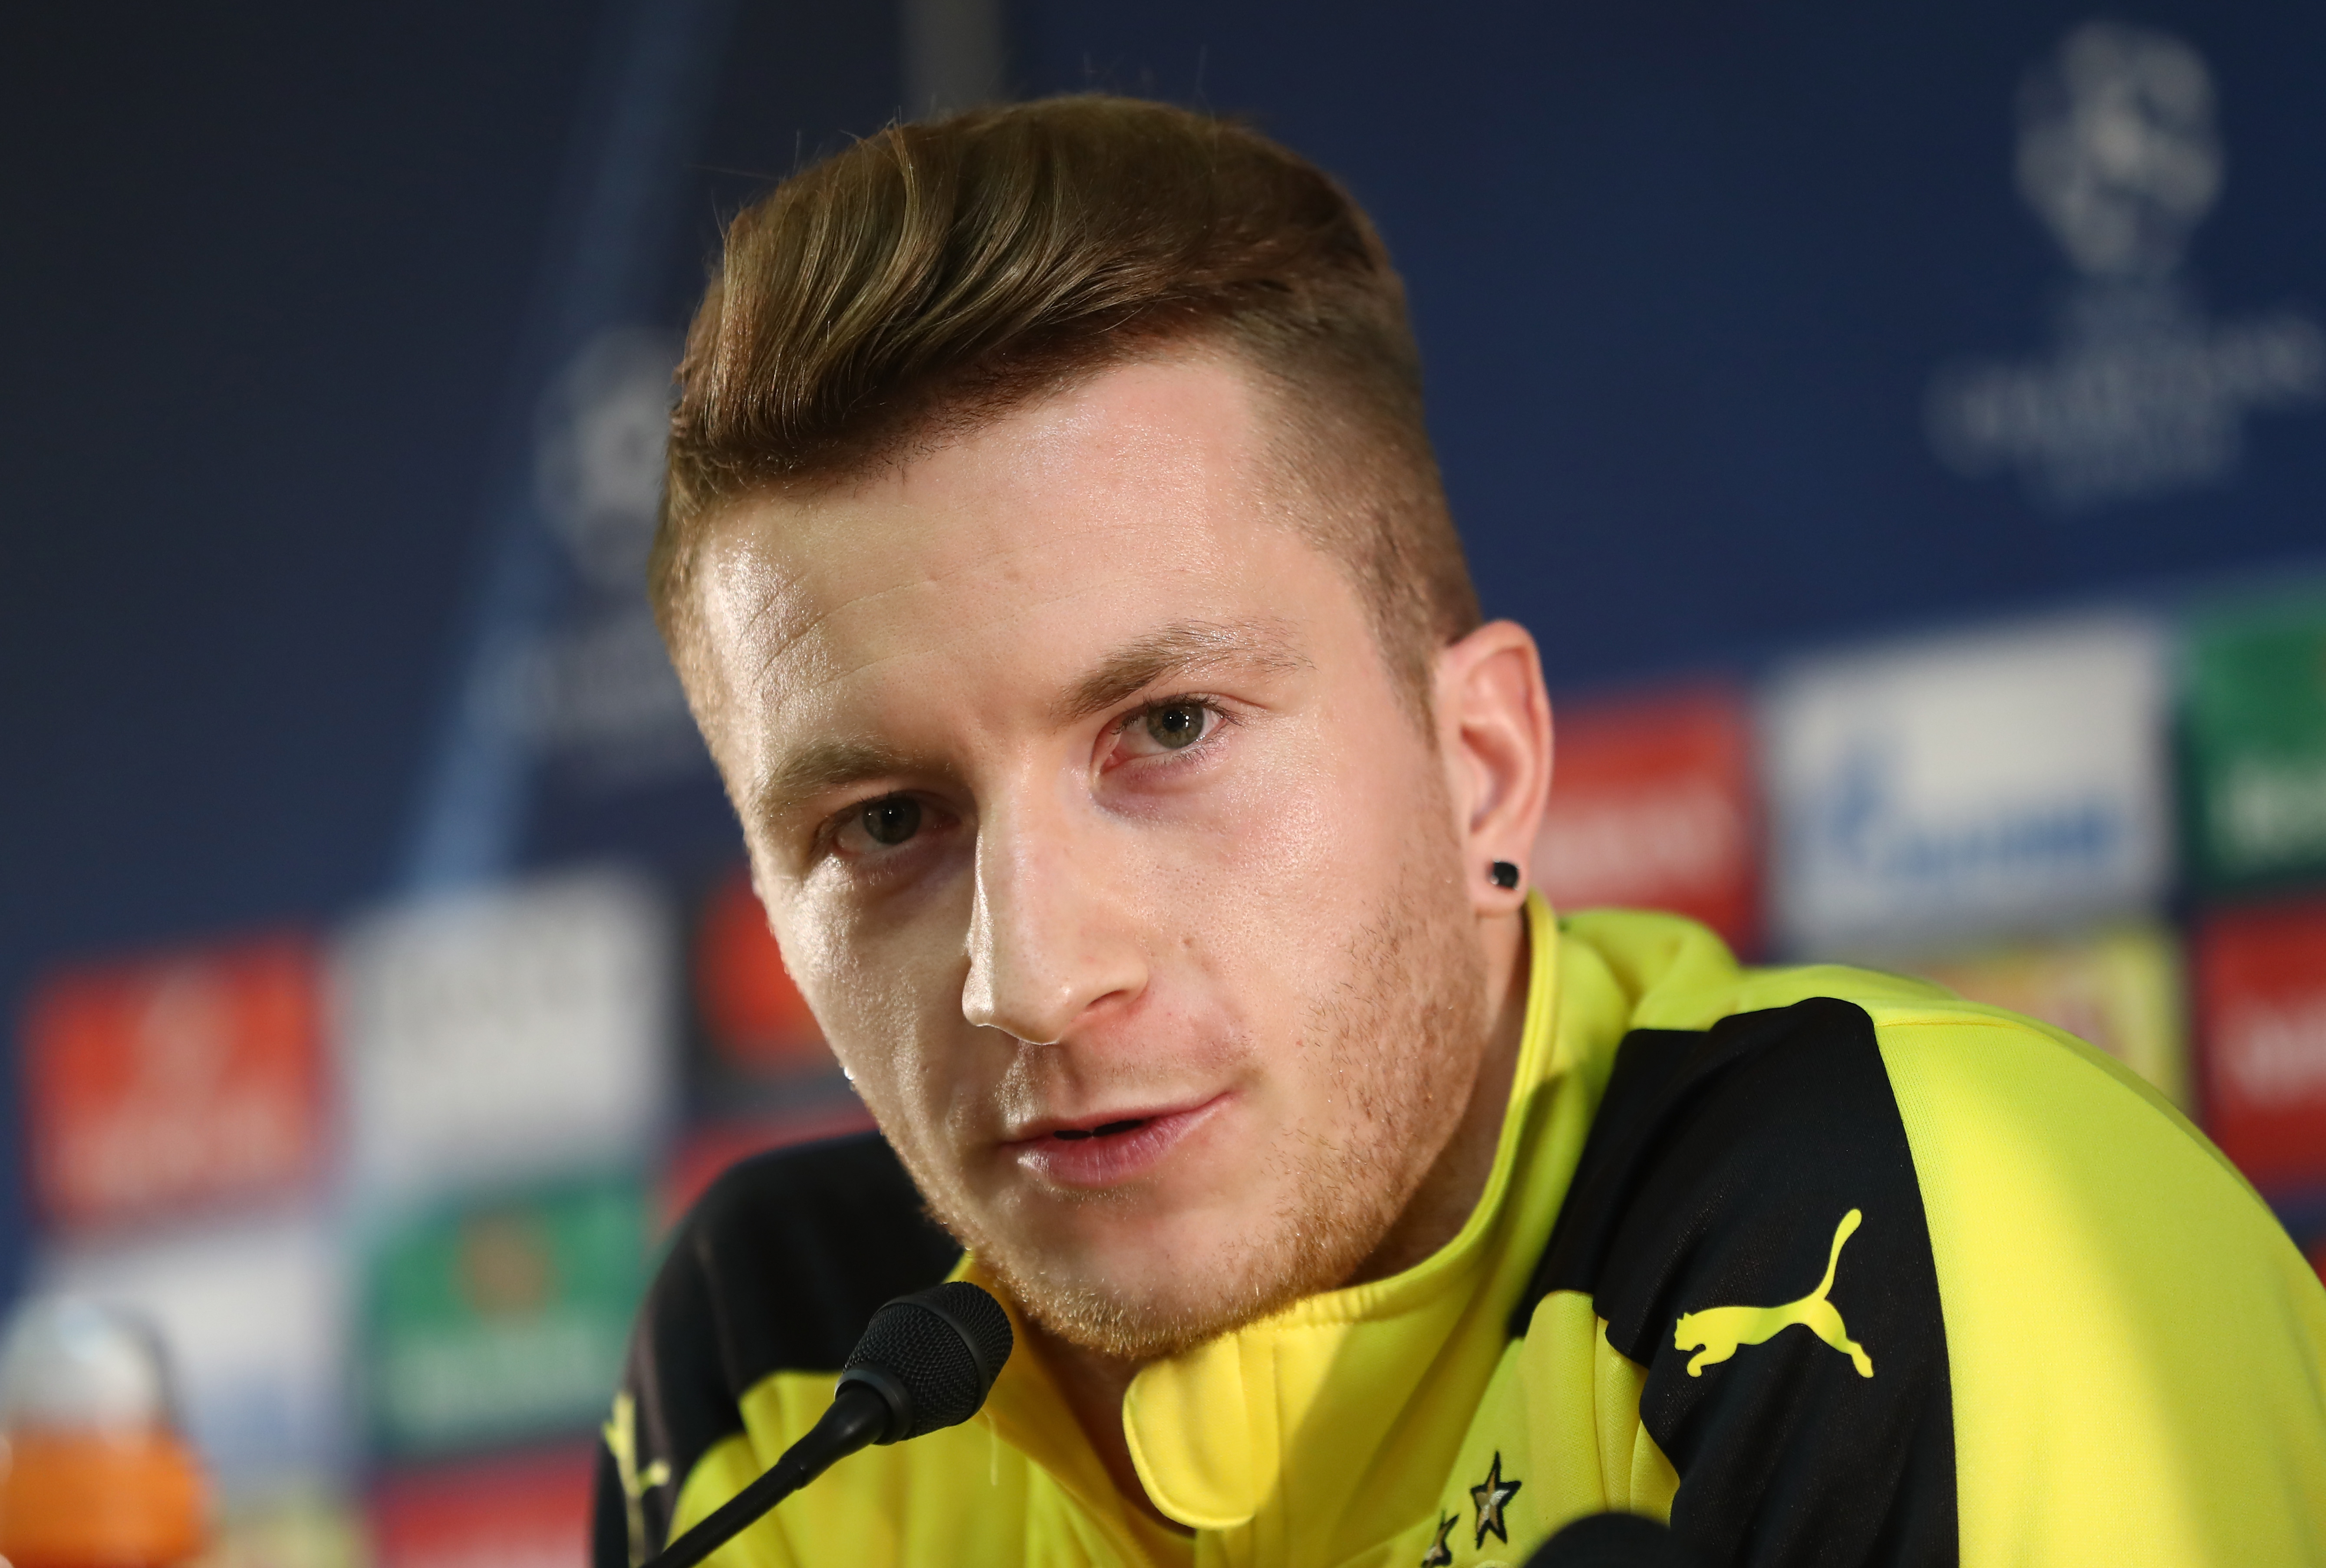 MONACO - APRIL 18:  Marco Reus of Borussia Dortmund speaks to the media during the Borussia Dortmund press conference at the Stade Louis II on April 18, 2017 in Monaco, Monaco.  (Photo by Alex Grimm/Bongarts/Getty Images)